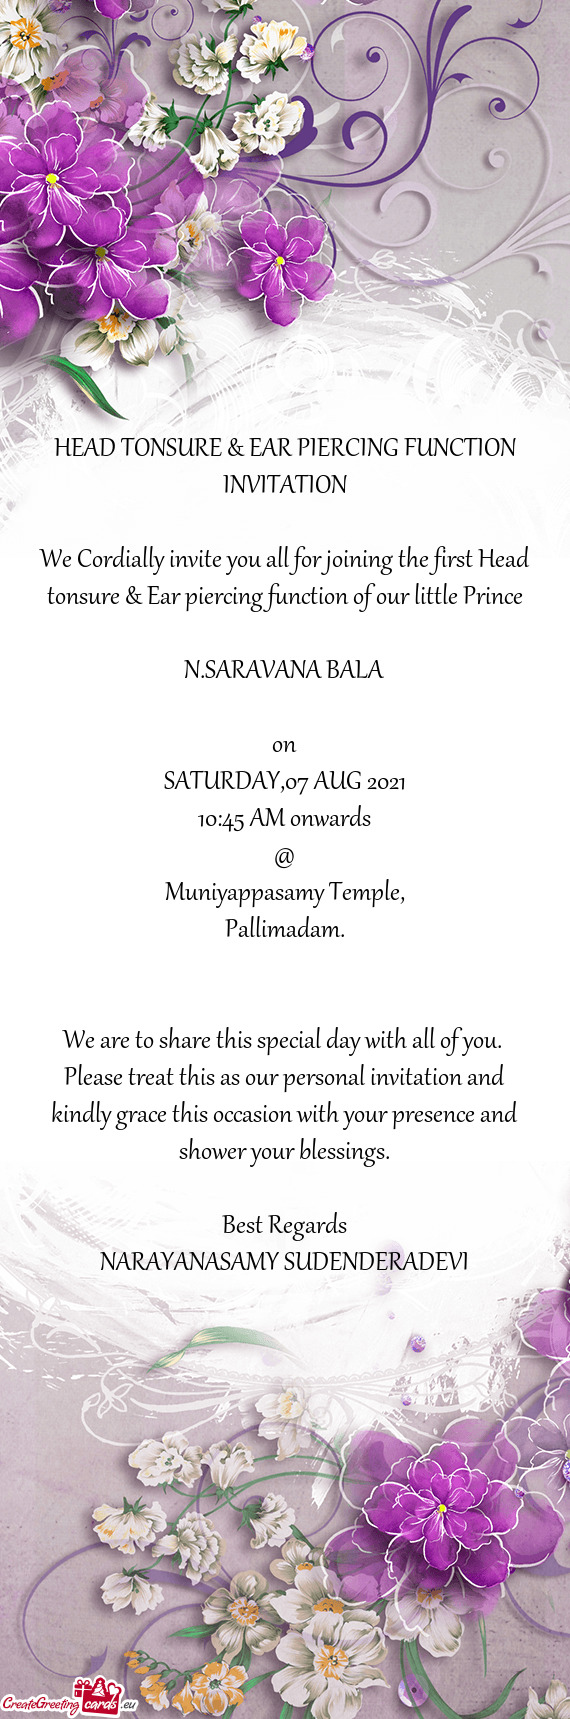 HEAD TONSURE & EAR PIERCING FUNCTION INVITATION
 
 We Cordially invite you all for joining the first